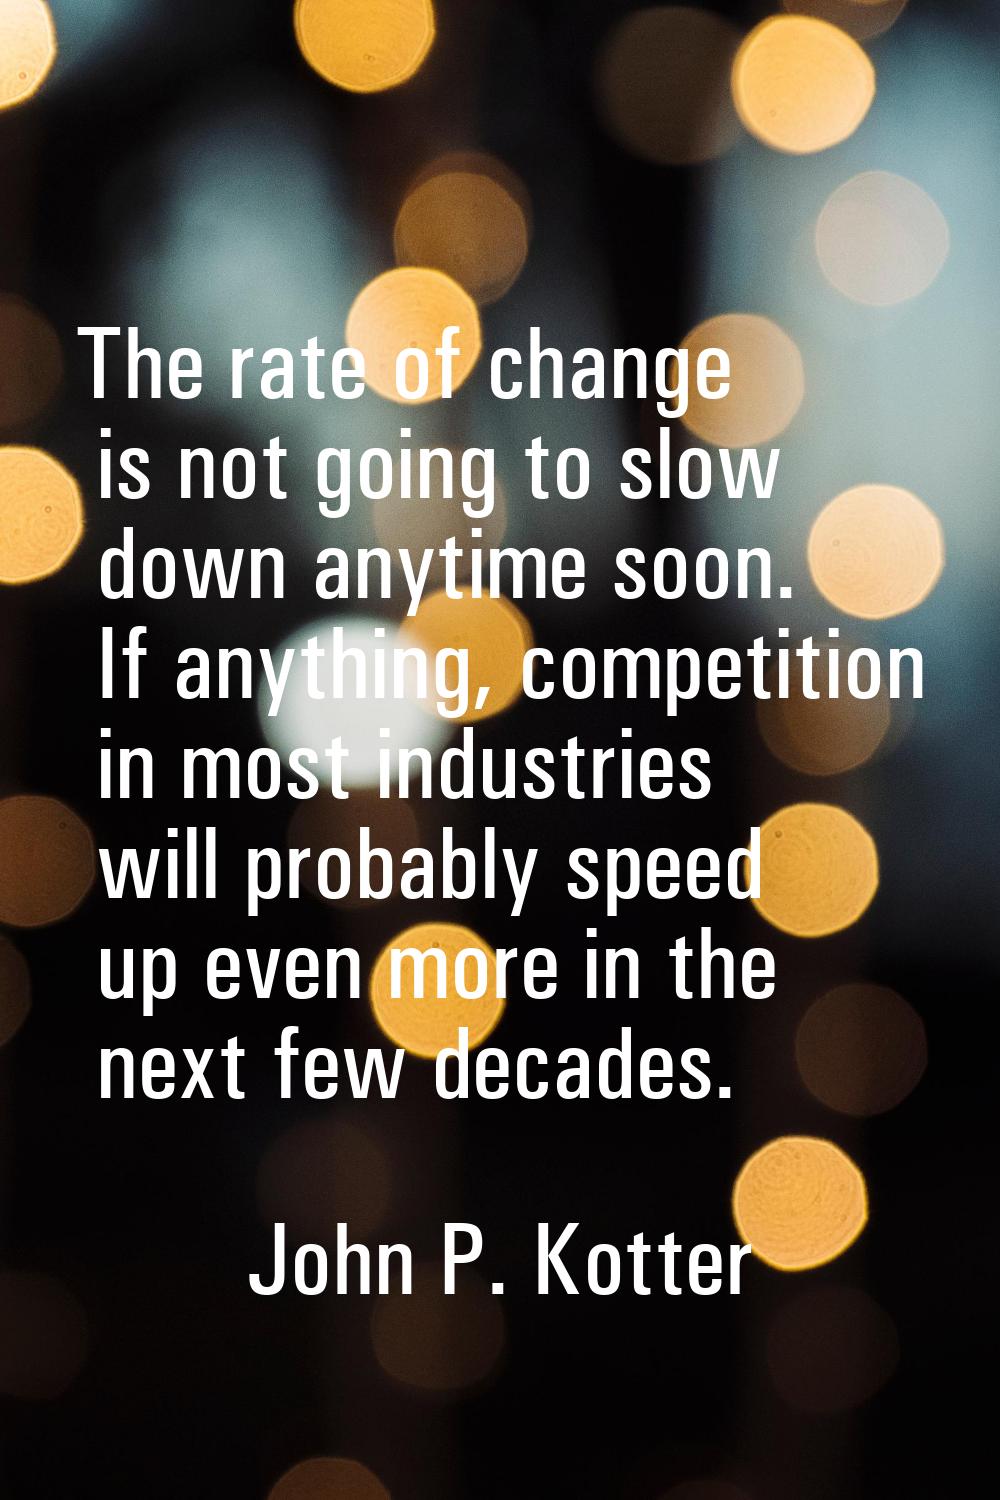 The rate of change is not going to slow down anytime soon. If anything, competition in most industr